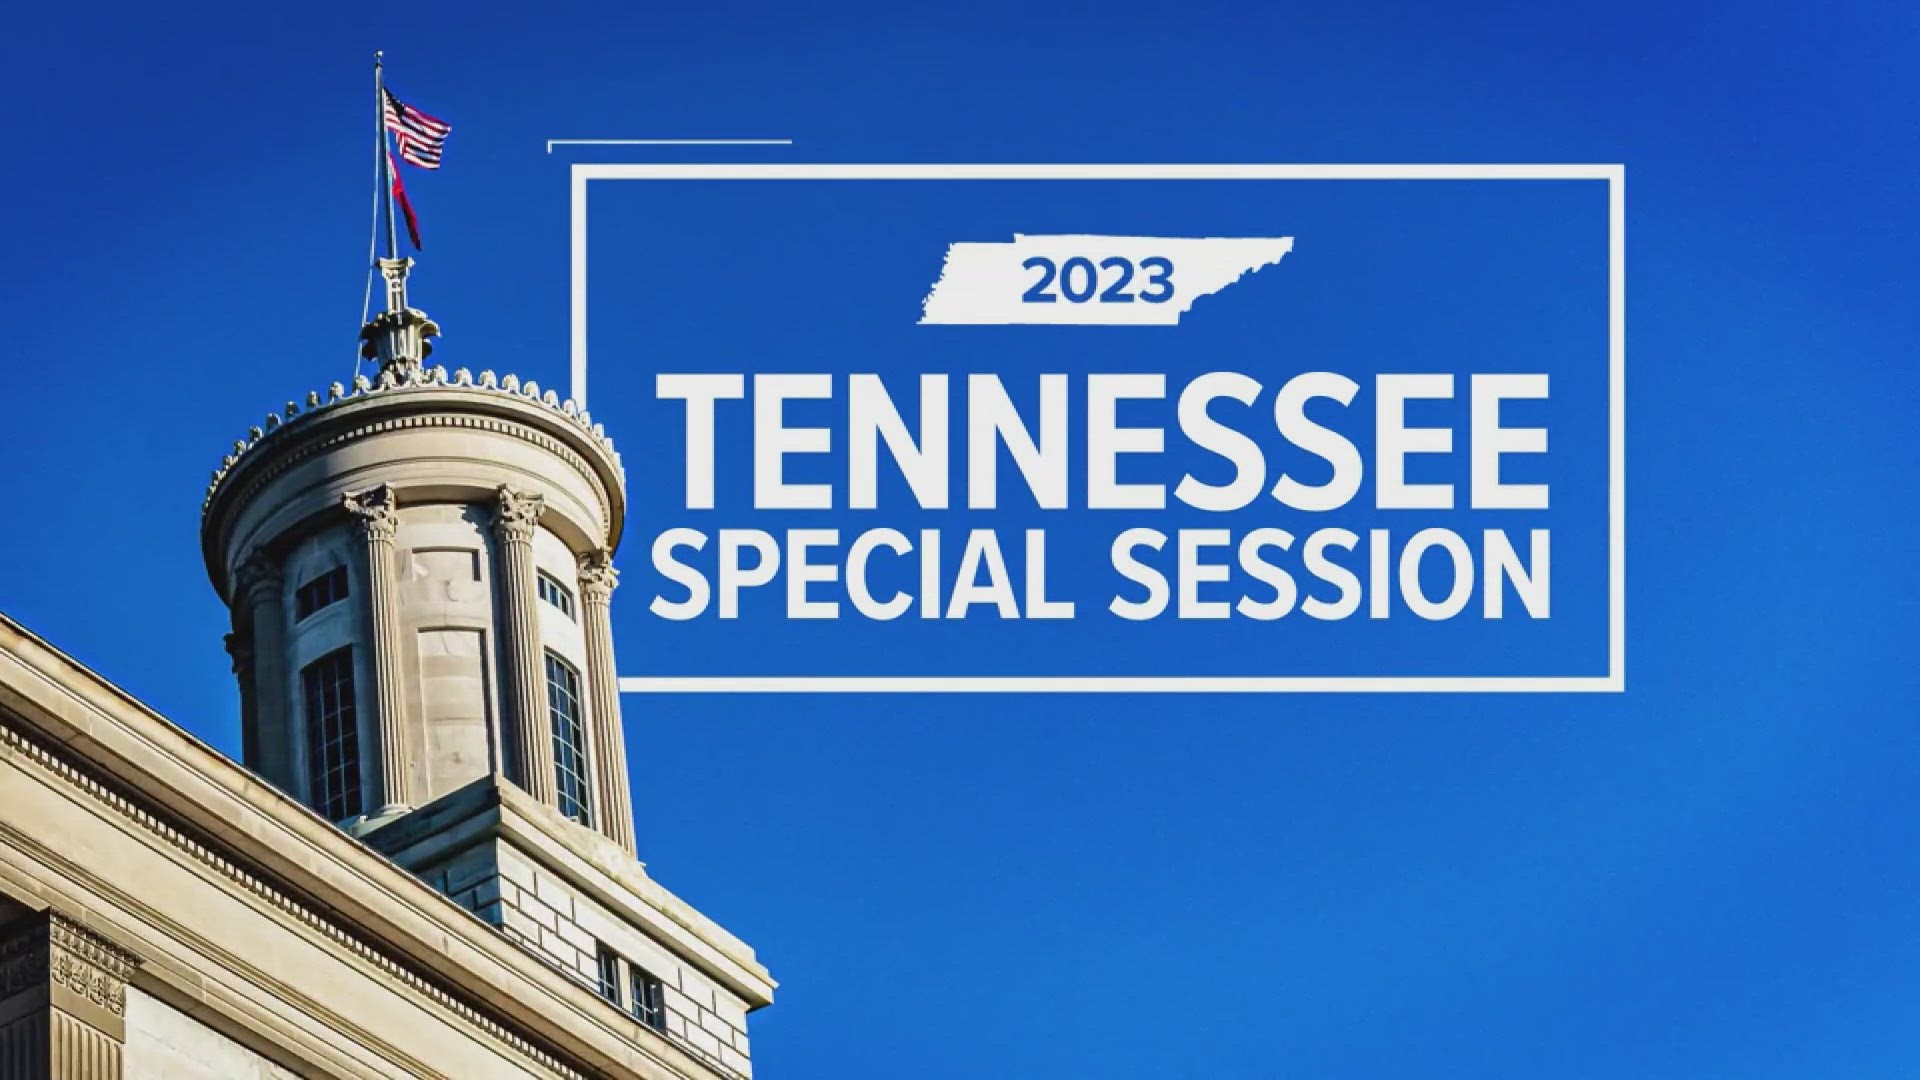 Republicans control both chambers of the Tennessee General Assembly with a supermajority.